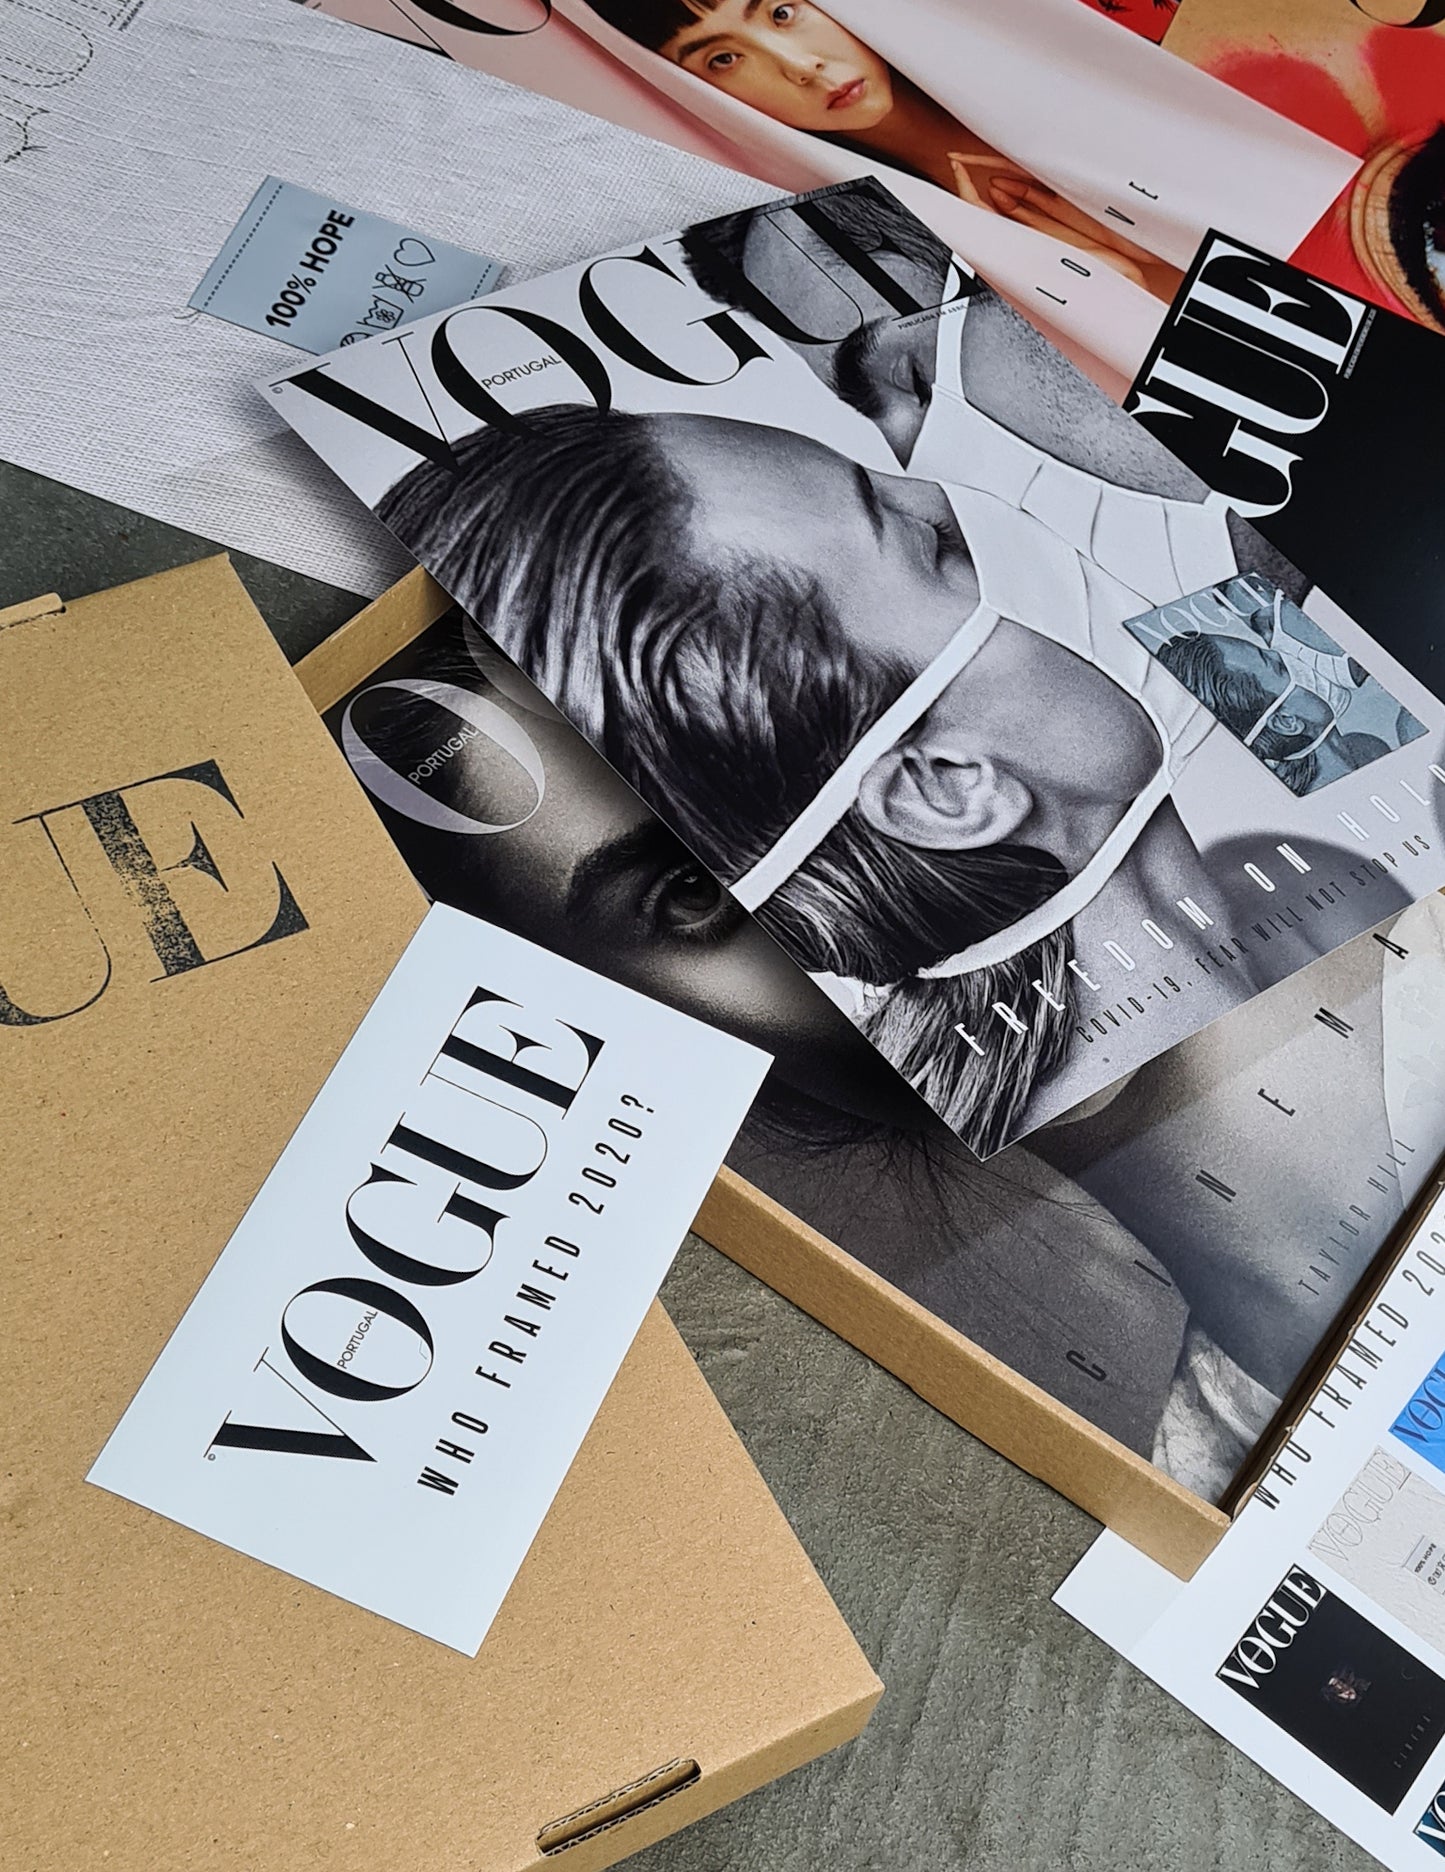 POSTER COLLECTION | VOGUE PORTUGAL 2020 - offer included